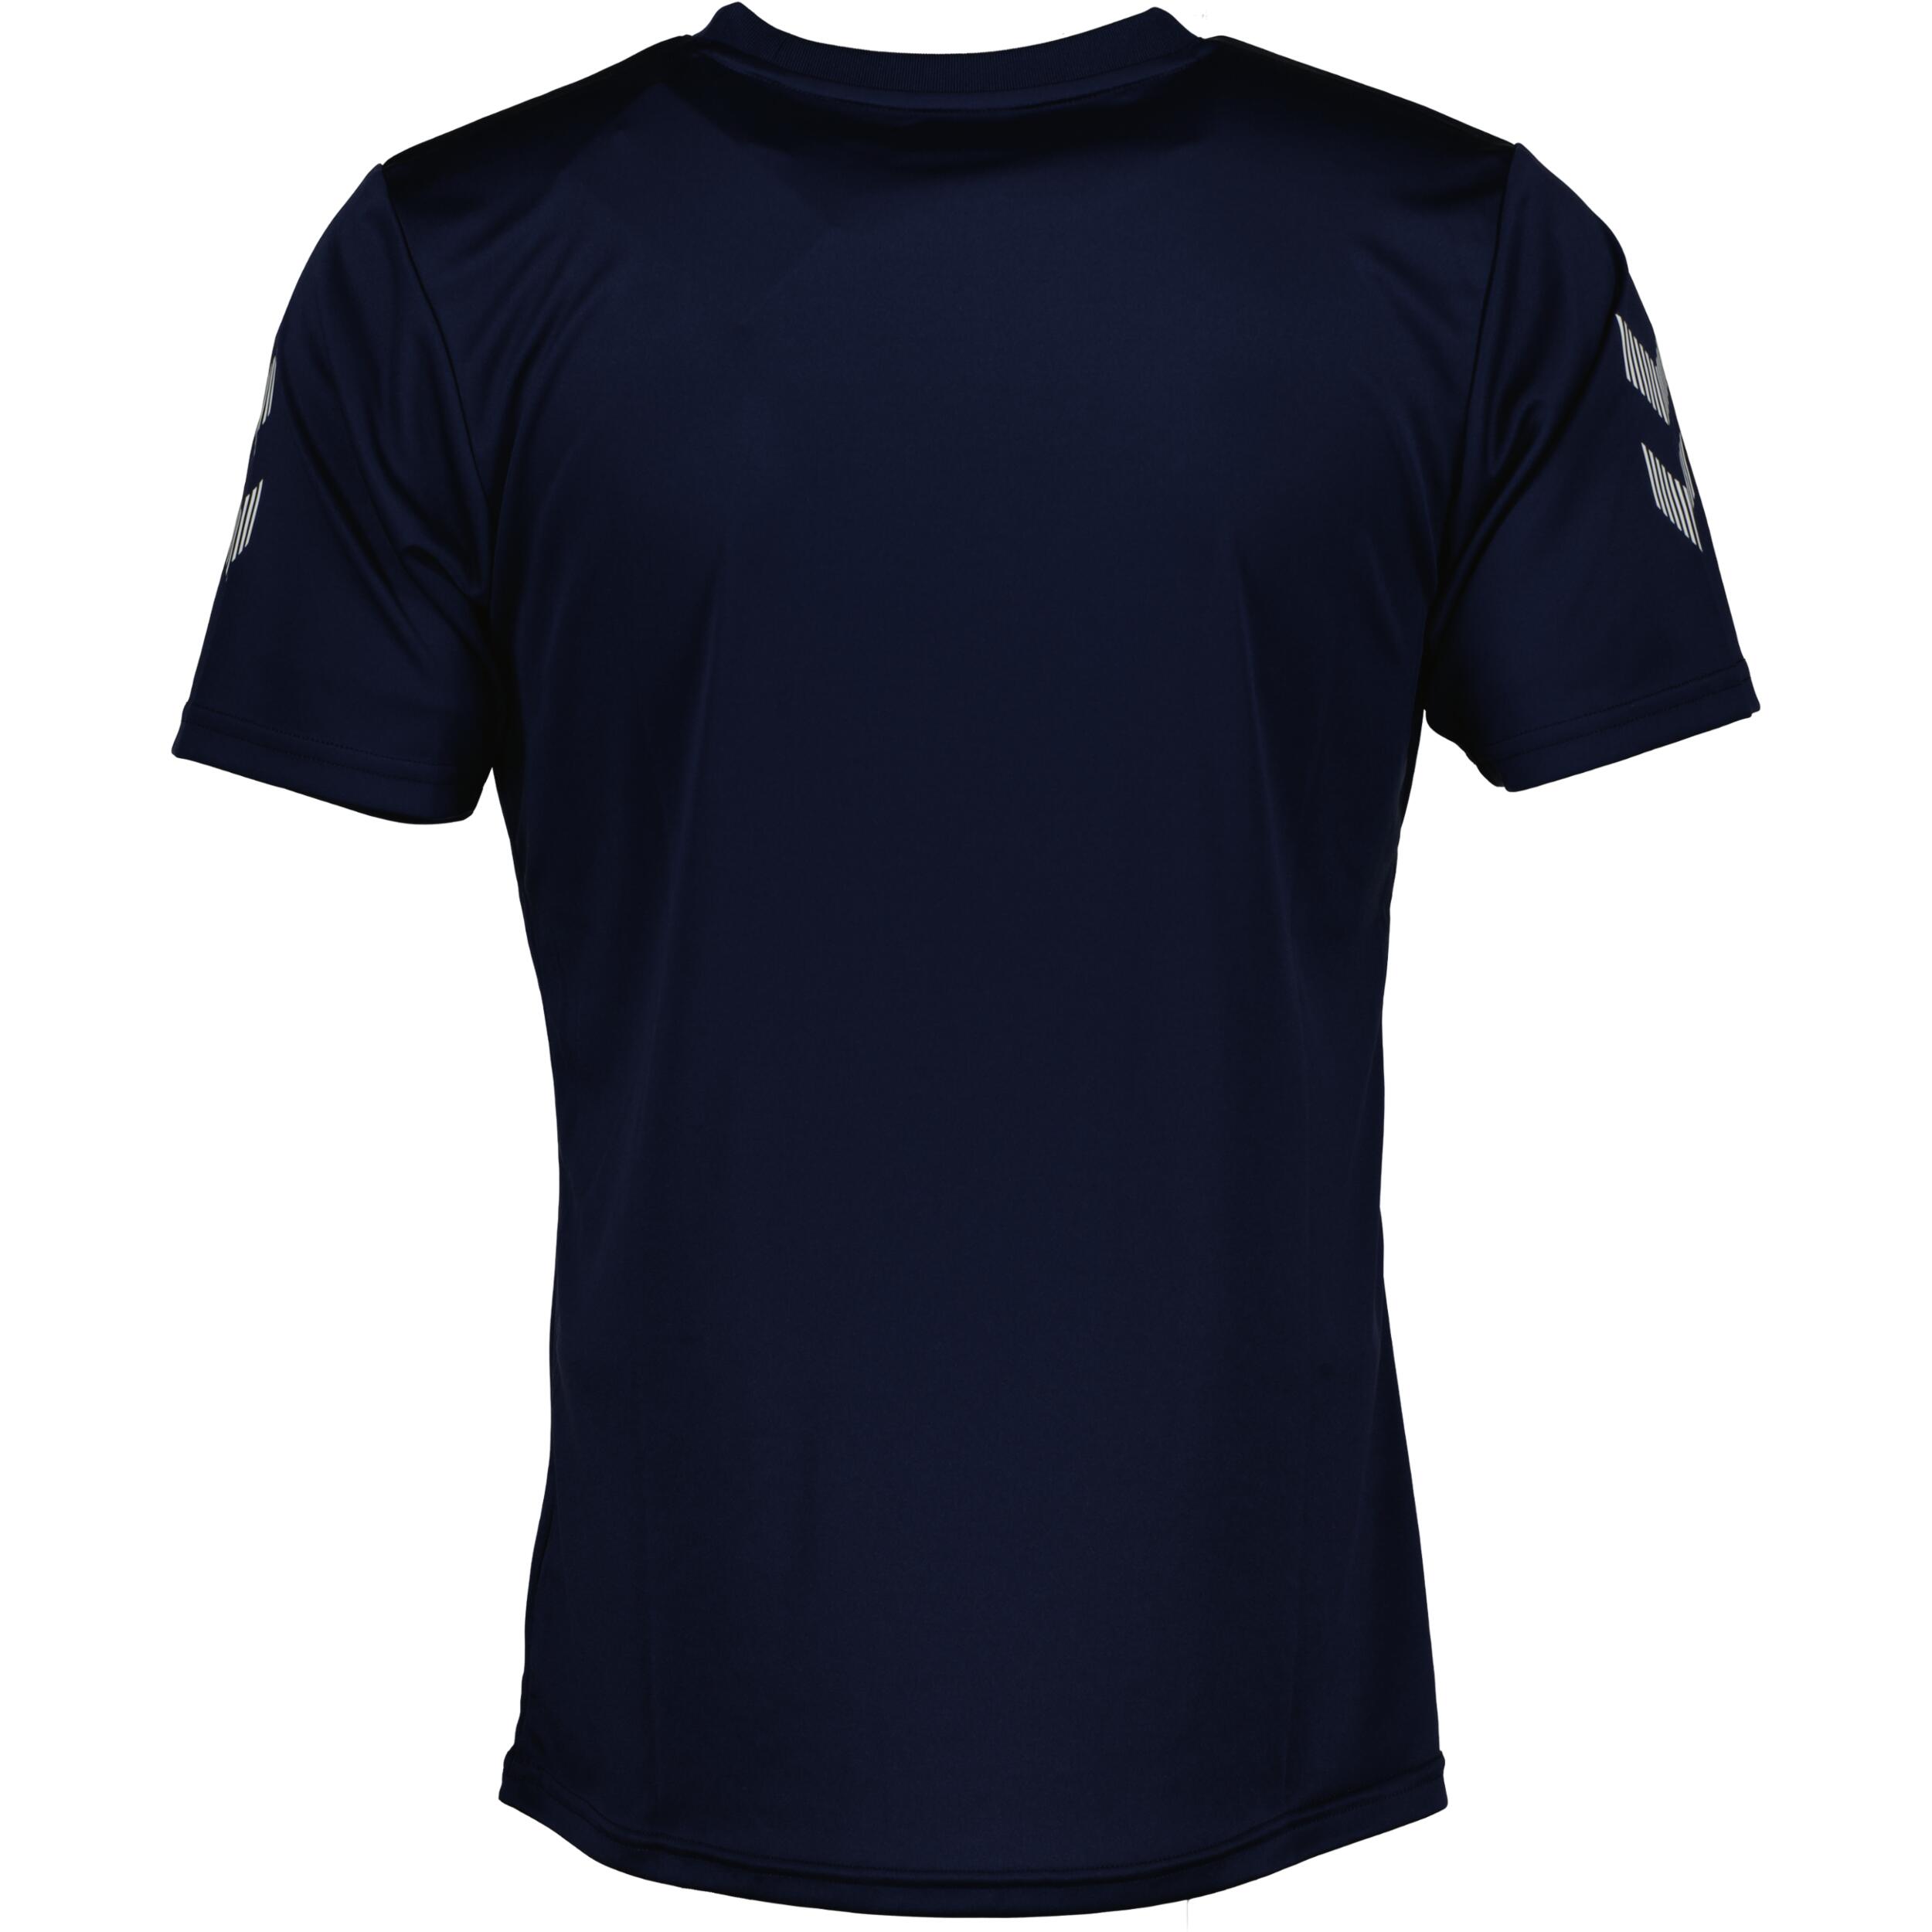 Solo jersey for men, great for football, in navy 2/3